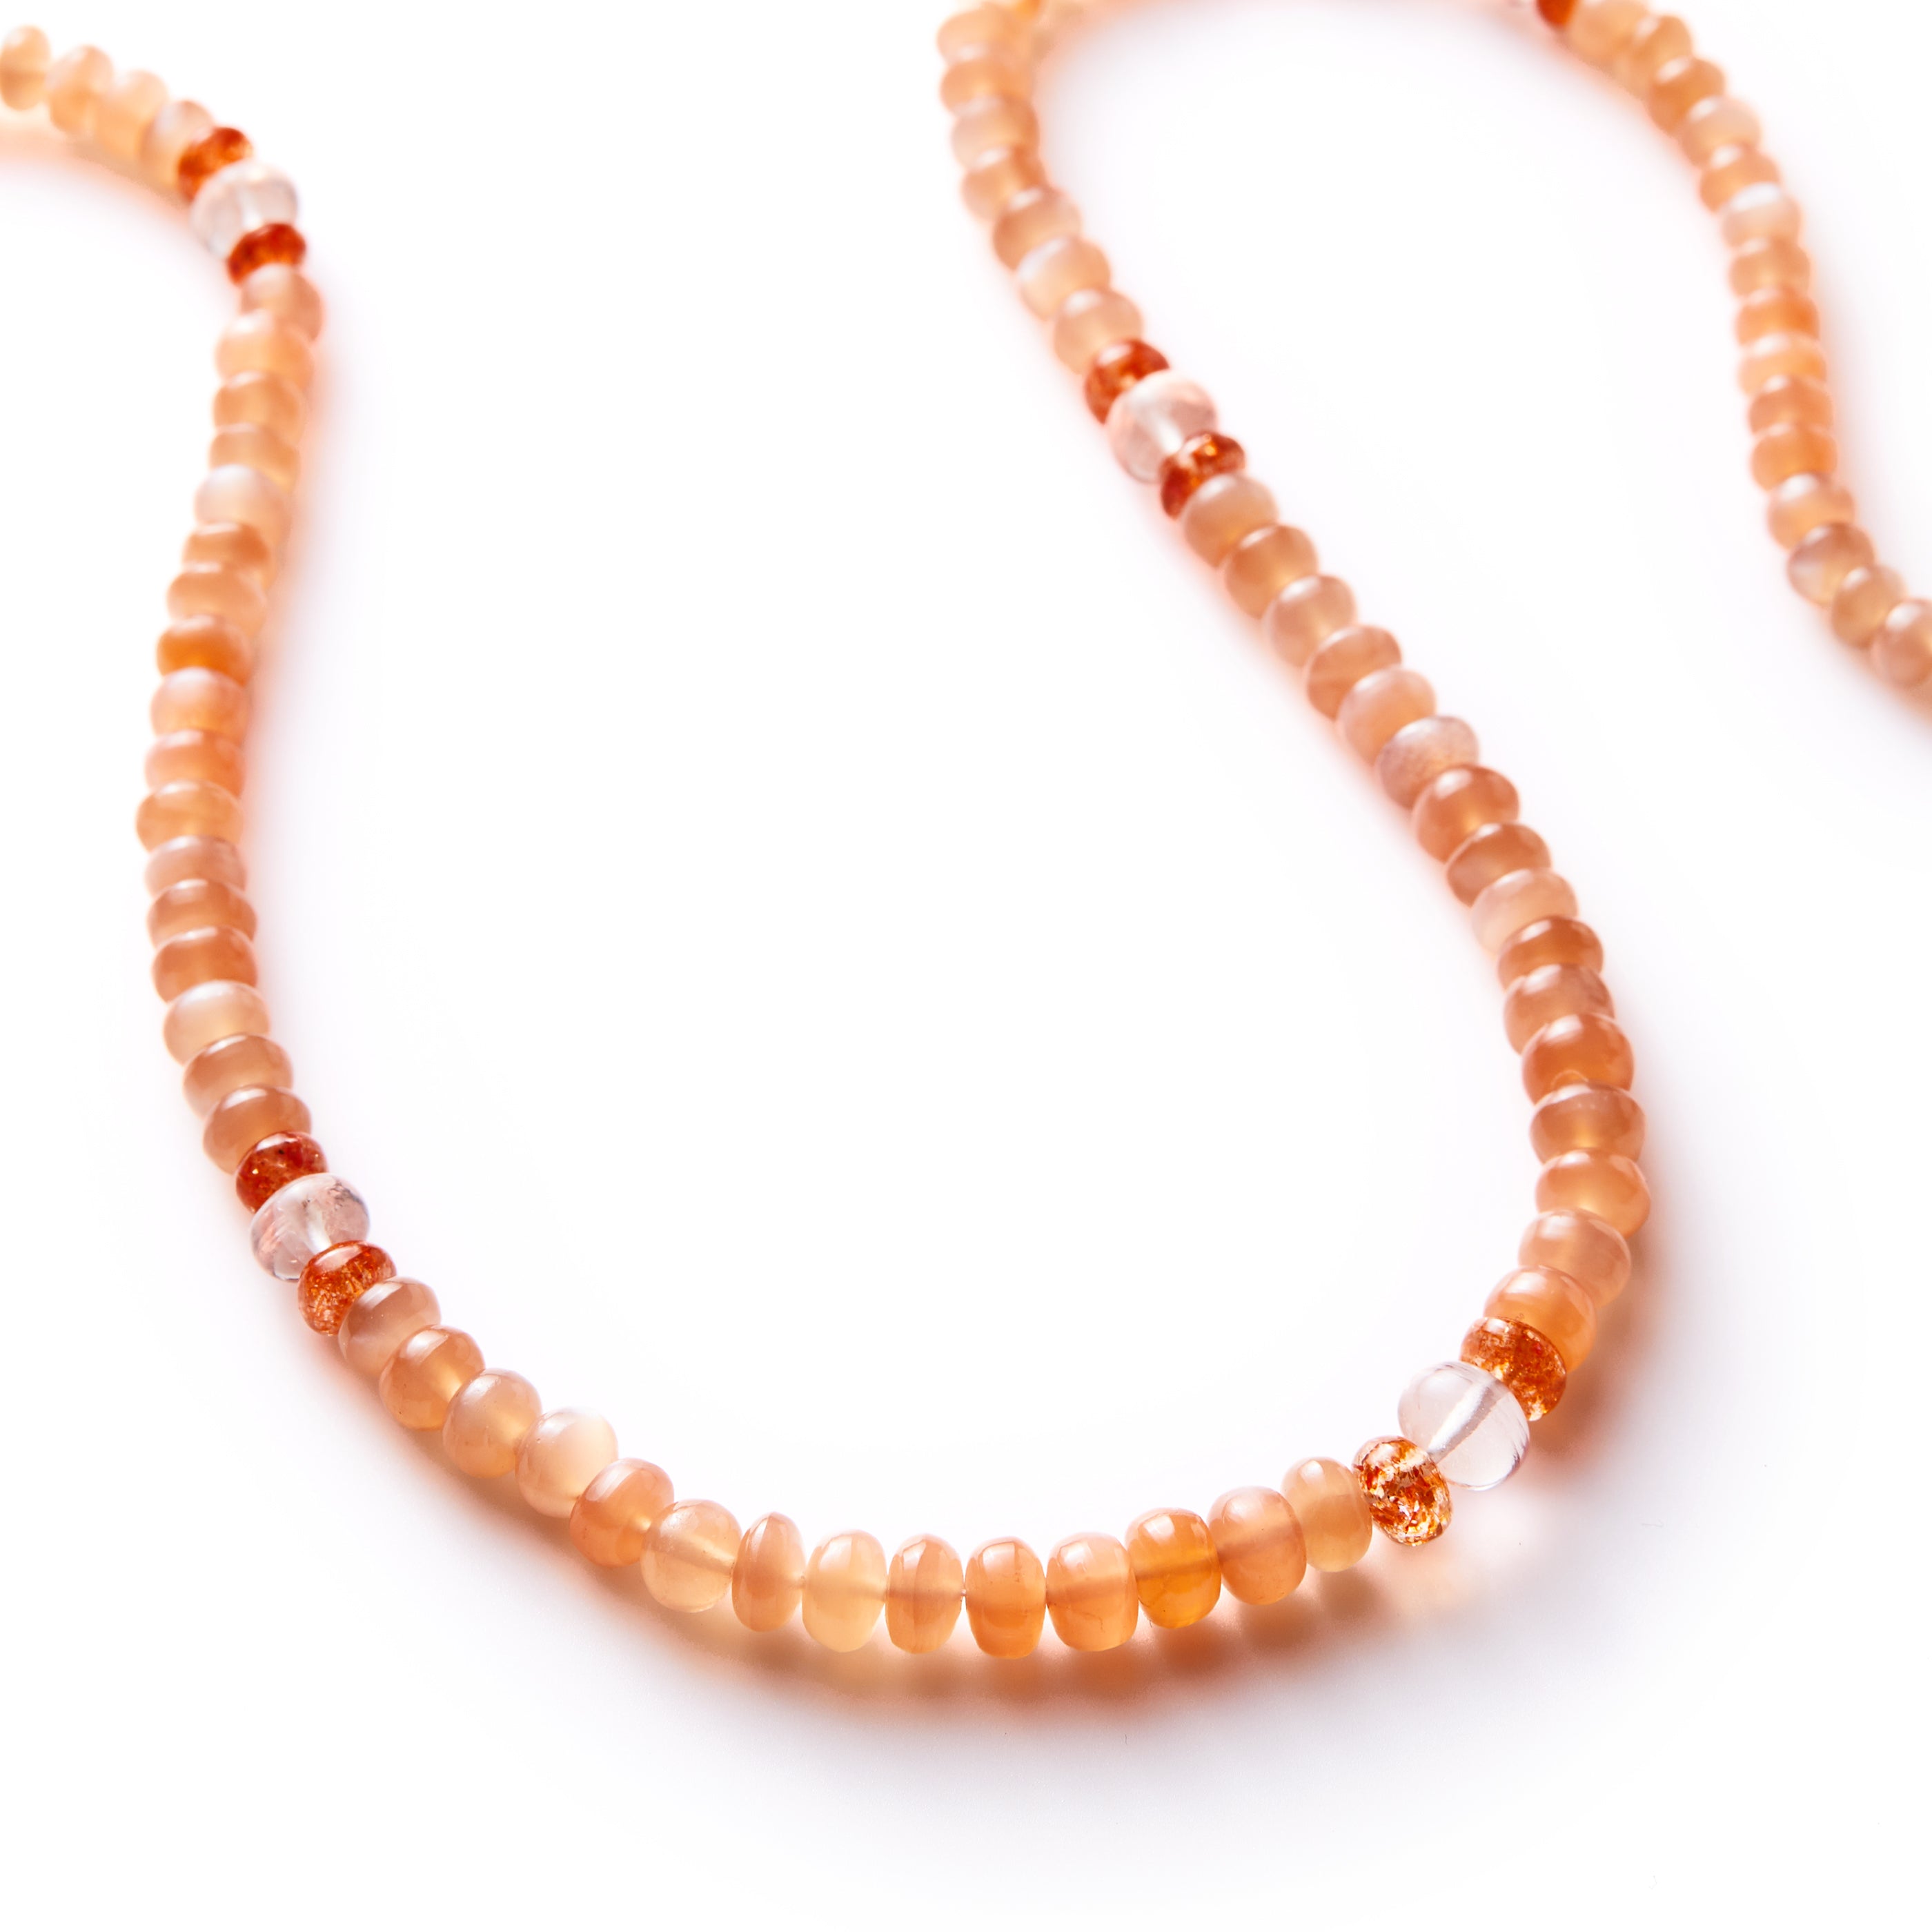 Crystal healing Sun Peach gemstone necklace known for radiating warmth, compassion, and peace